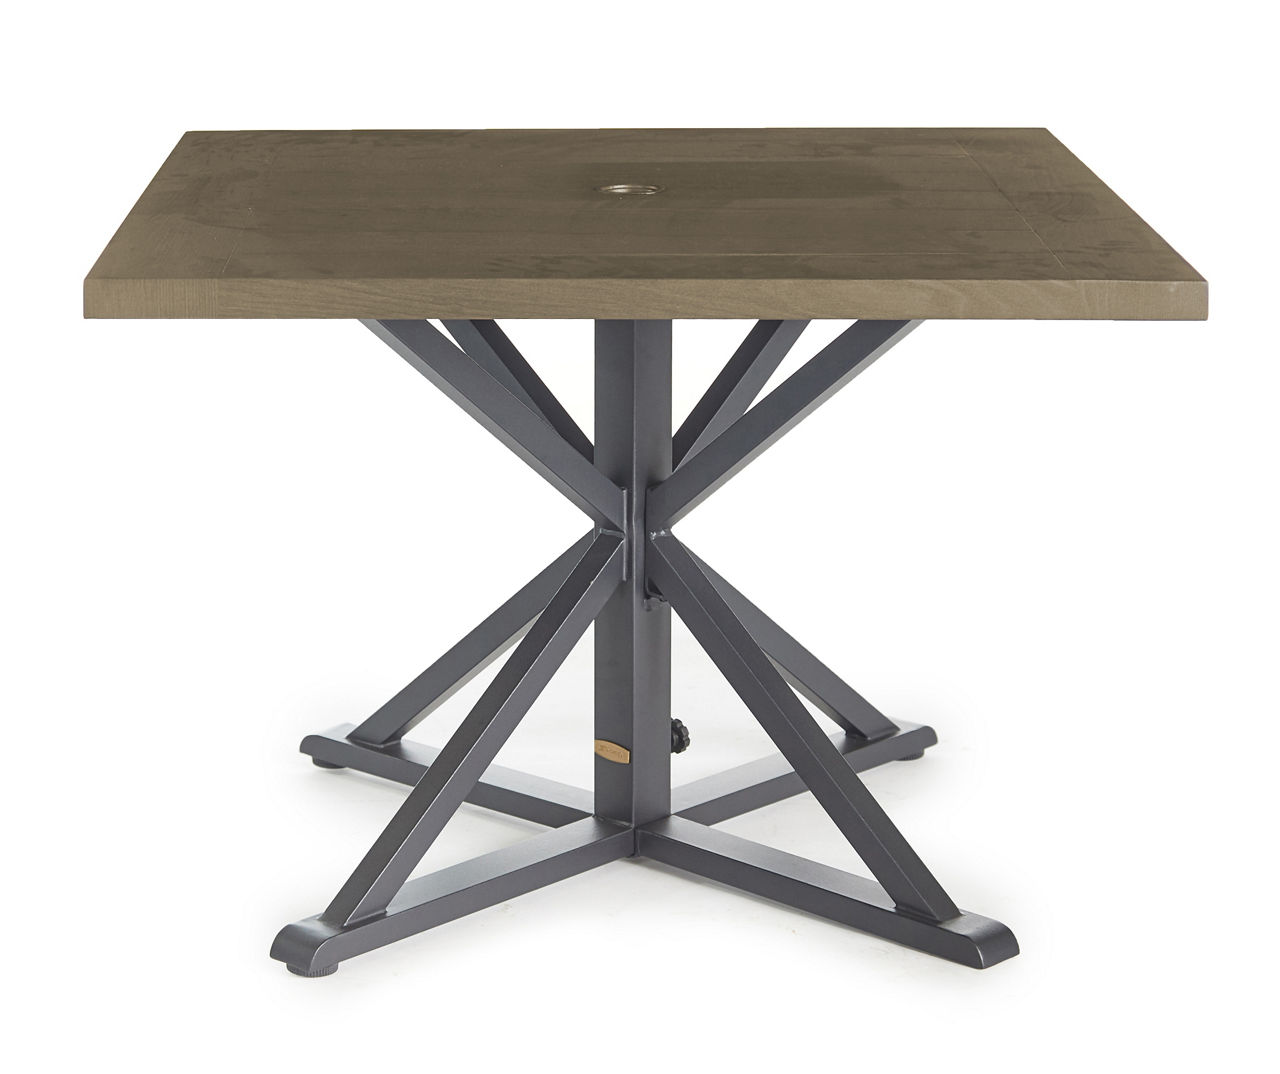 Autumn Cove Light Brown Wood Look Square Steel Patio Dining Table